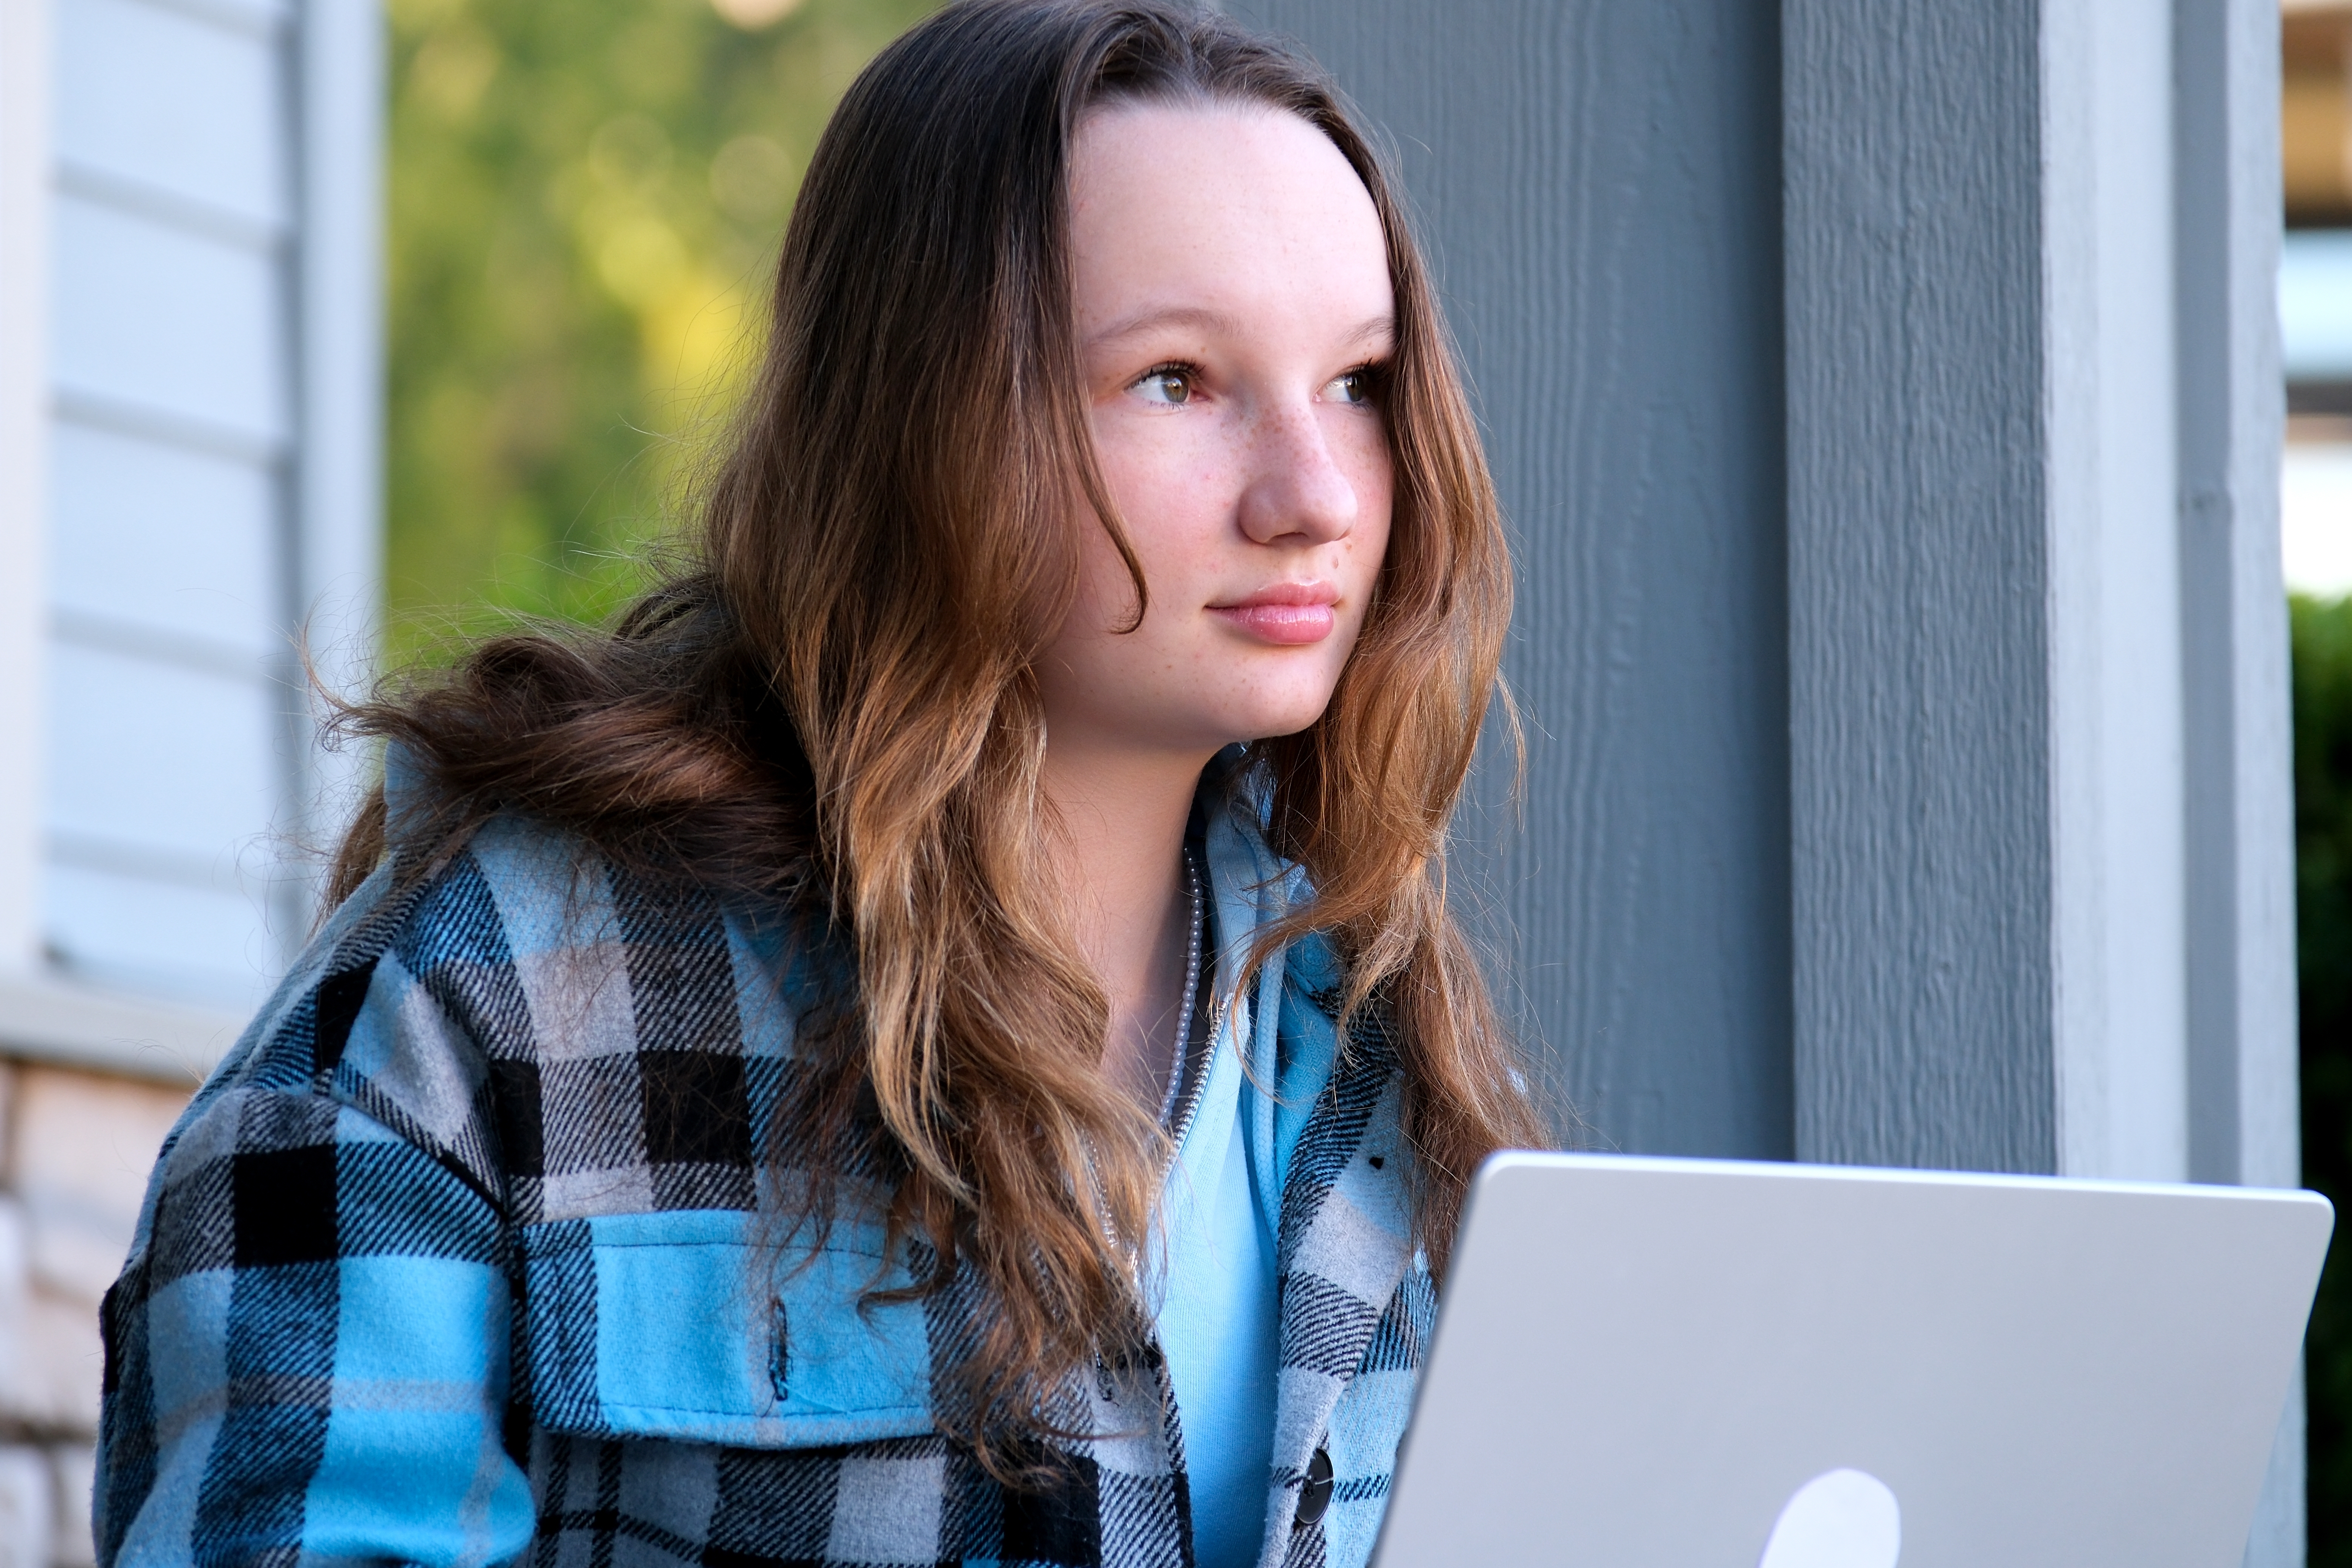 A teen sitting on the porch thinking with a laptop.